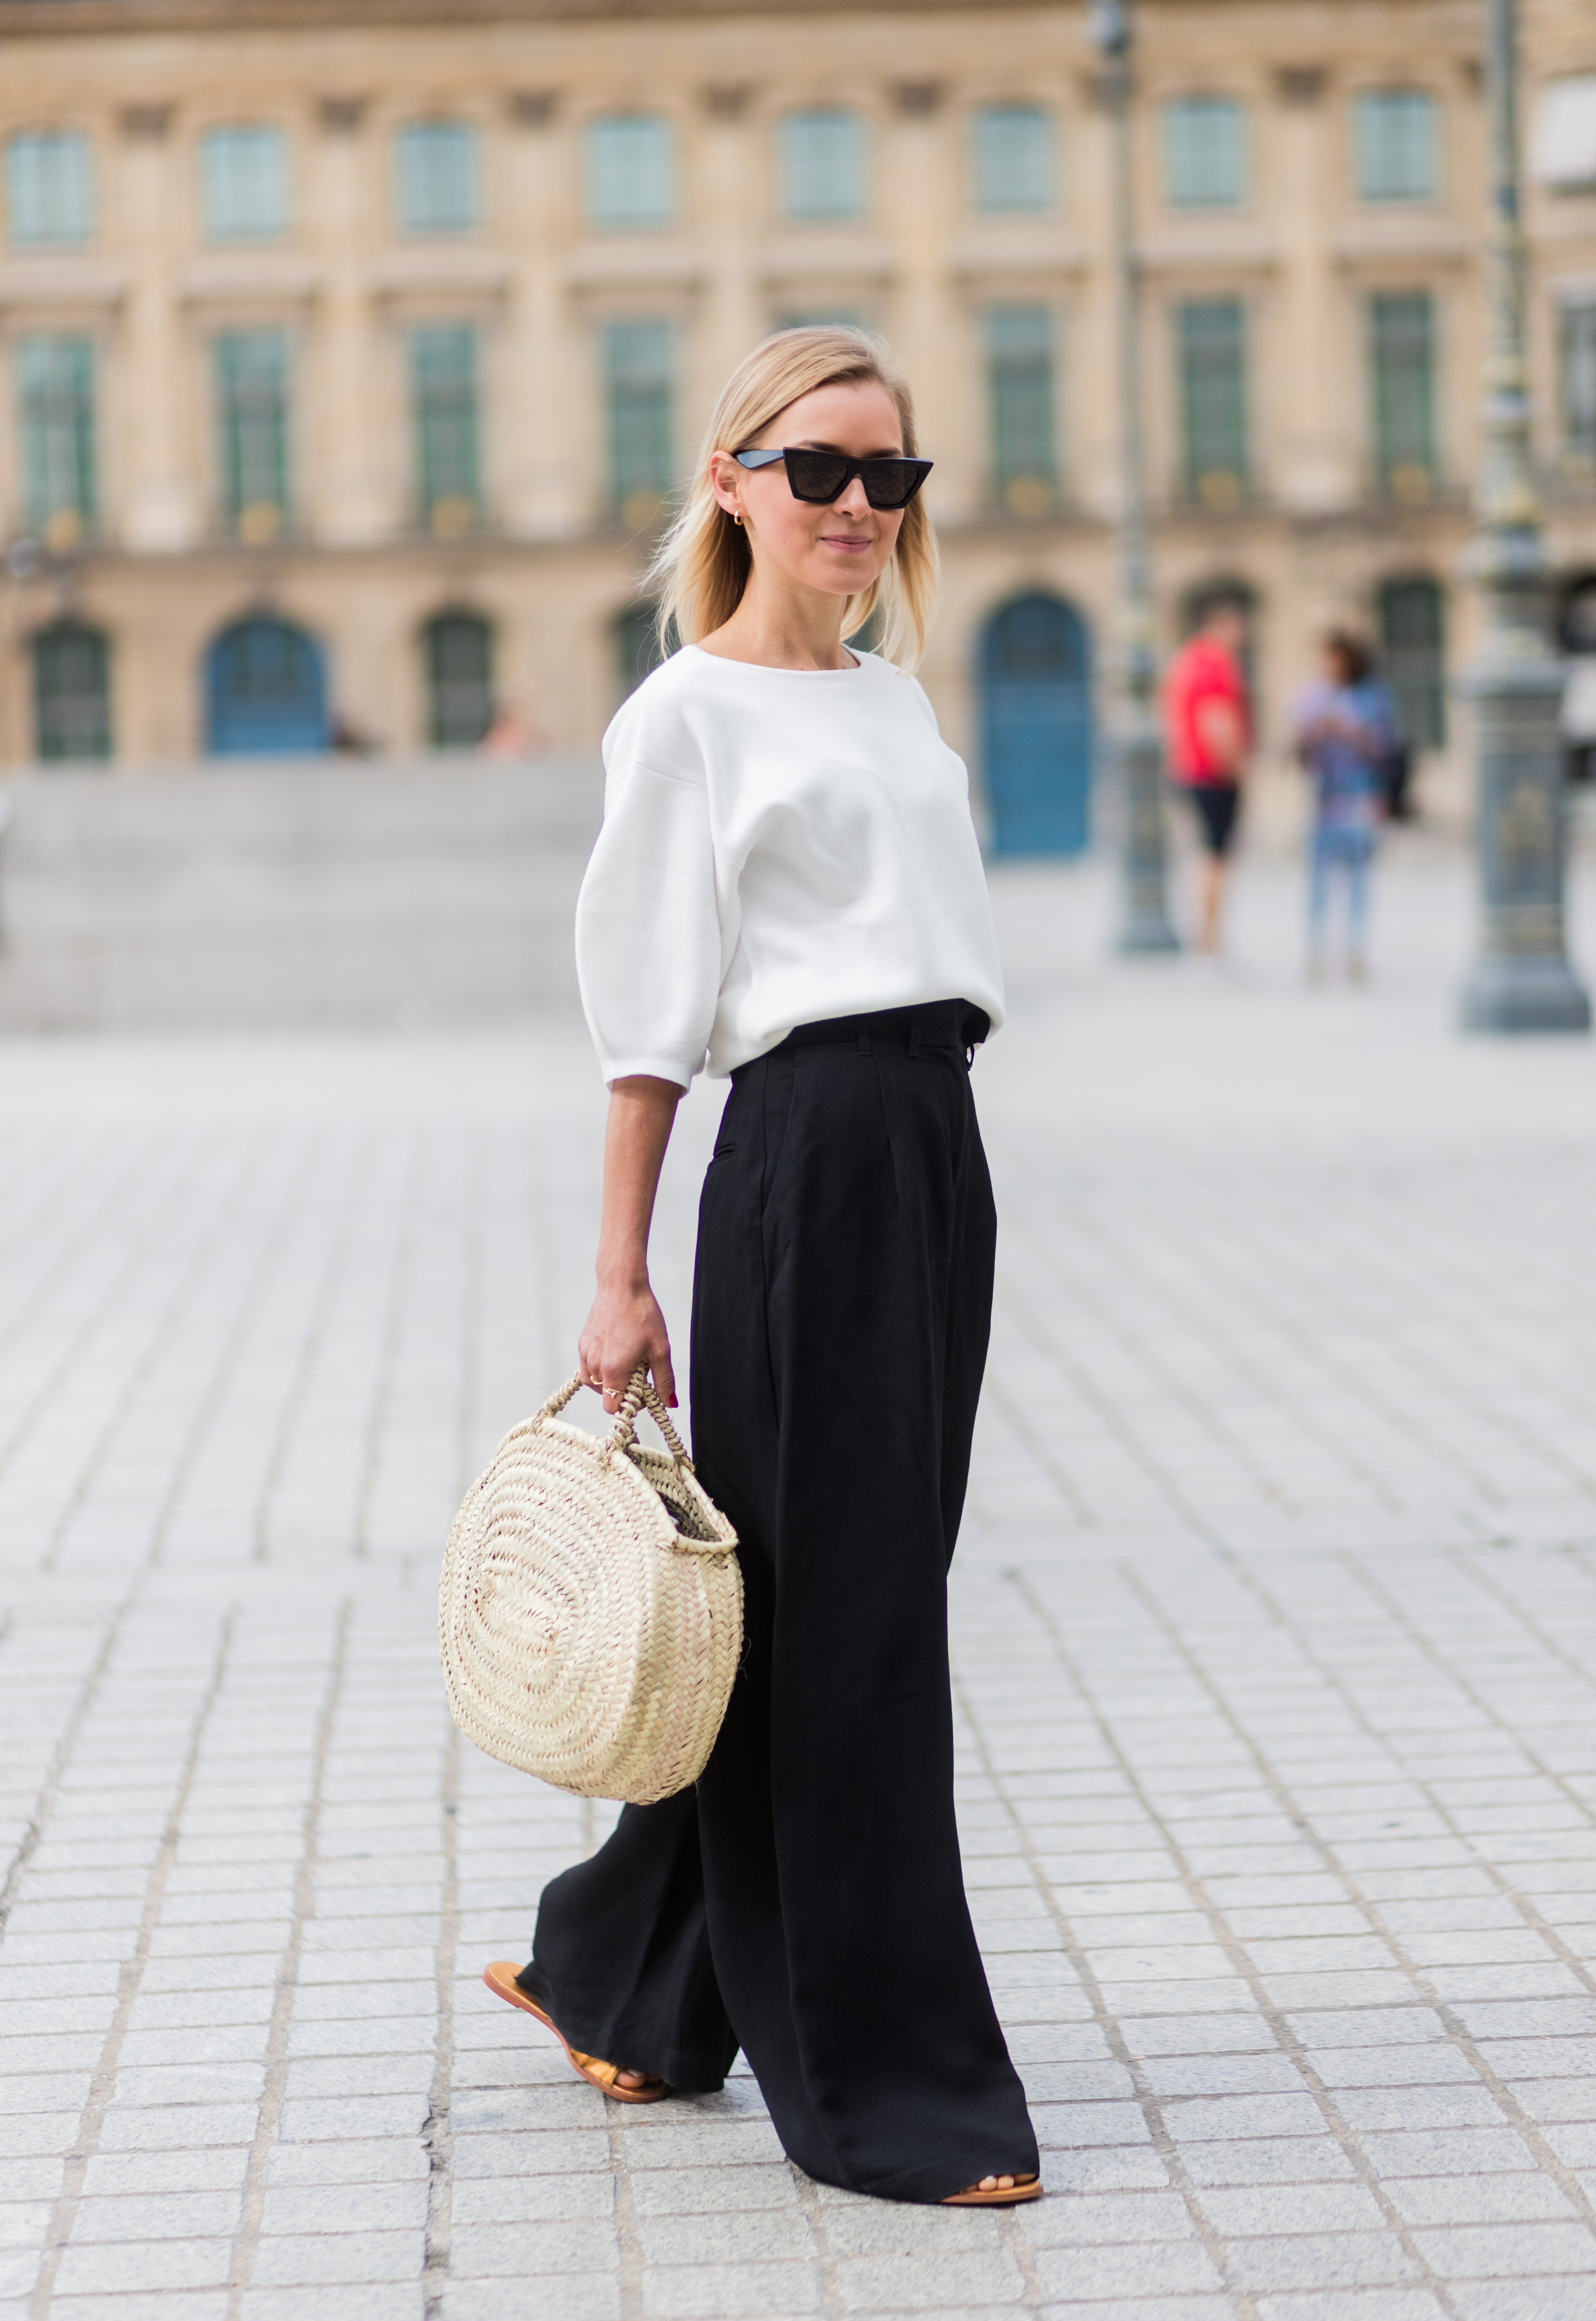 3 Looks That Prove the Wicker Bag Is a Summer Staple